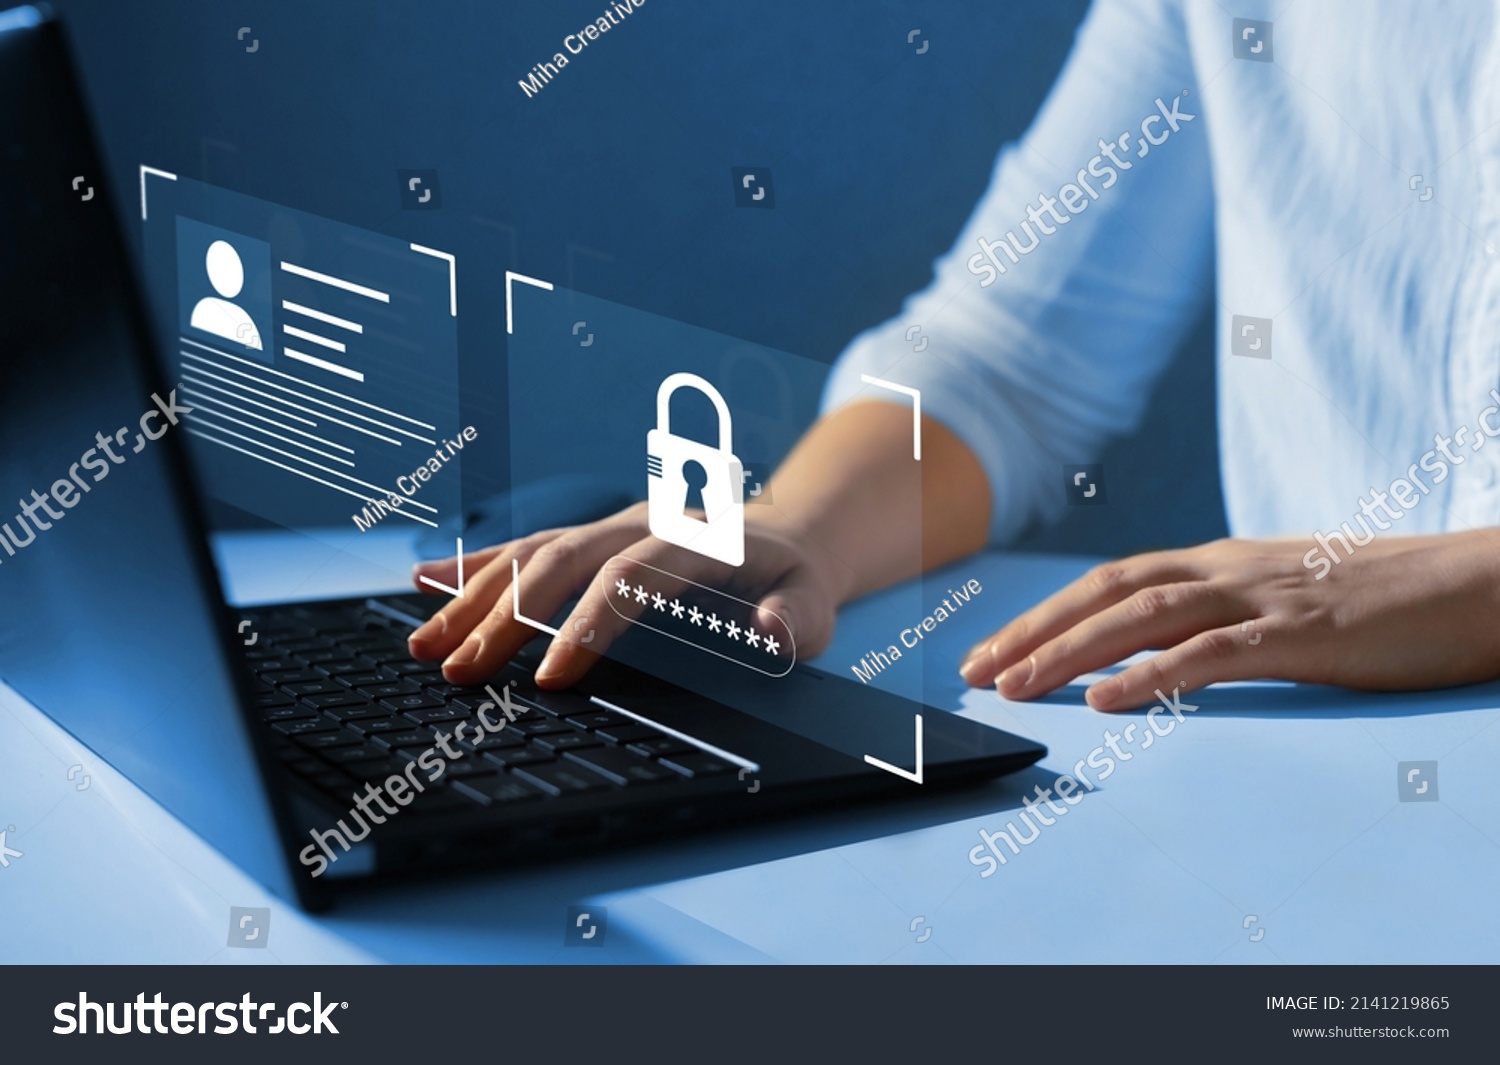 Employee confidentiality. Software for security, searching and managing corporate files and employee information. NDA(Non-disclosure agreement). Management system with employee privacy. #2141219865